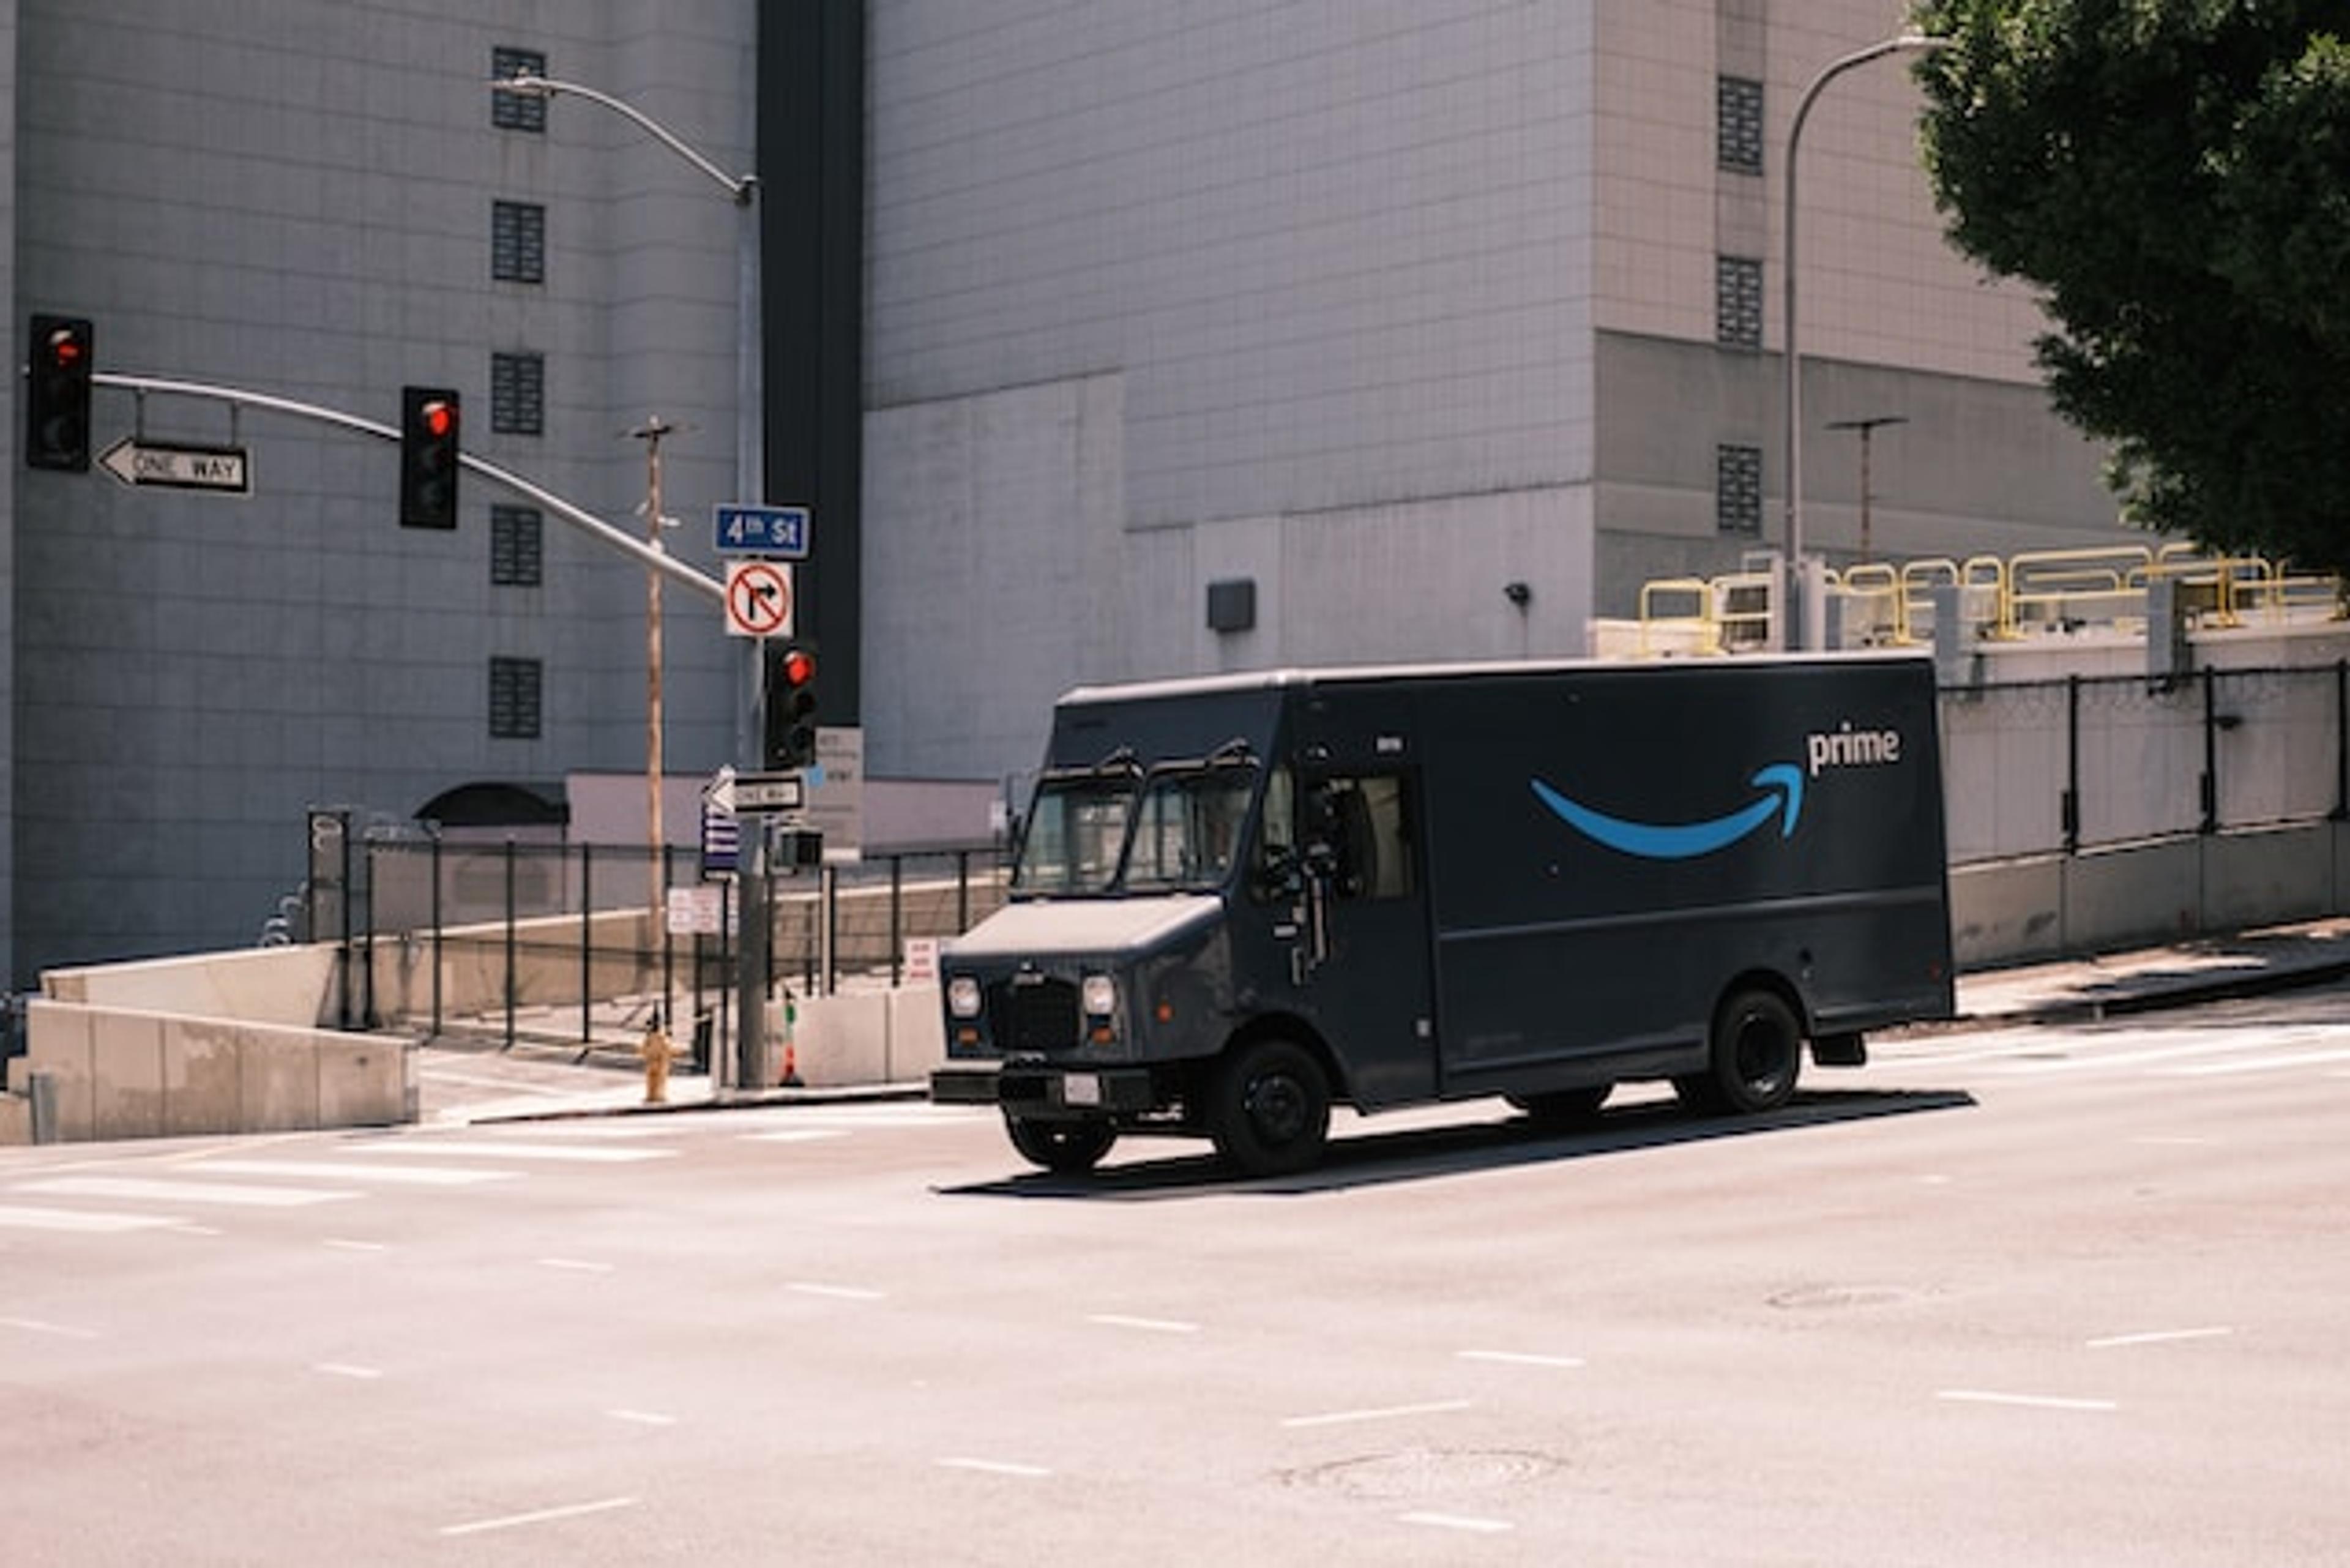 Amazon Prime truck driving by on an empty street.